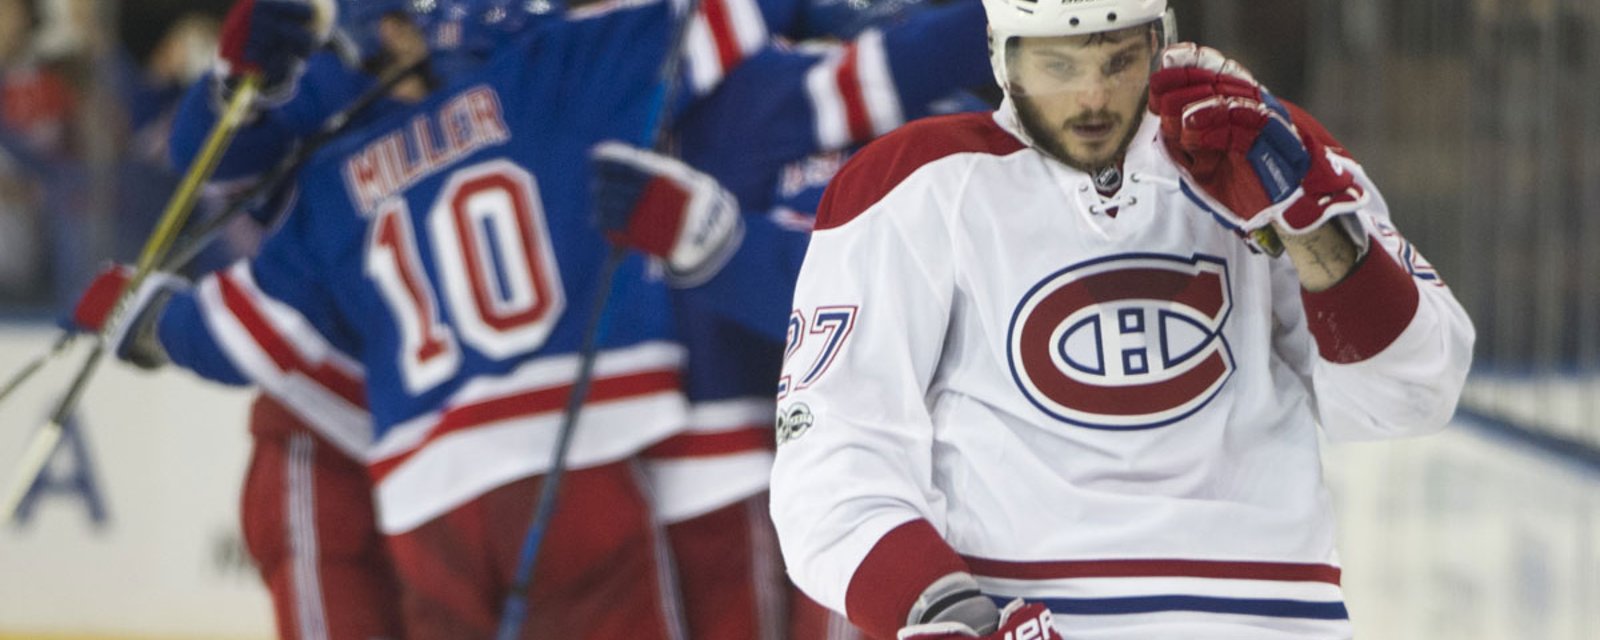 Galchenyuk attended NHL’s drug and alcohol rehab, claims former Habs coach 